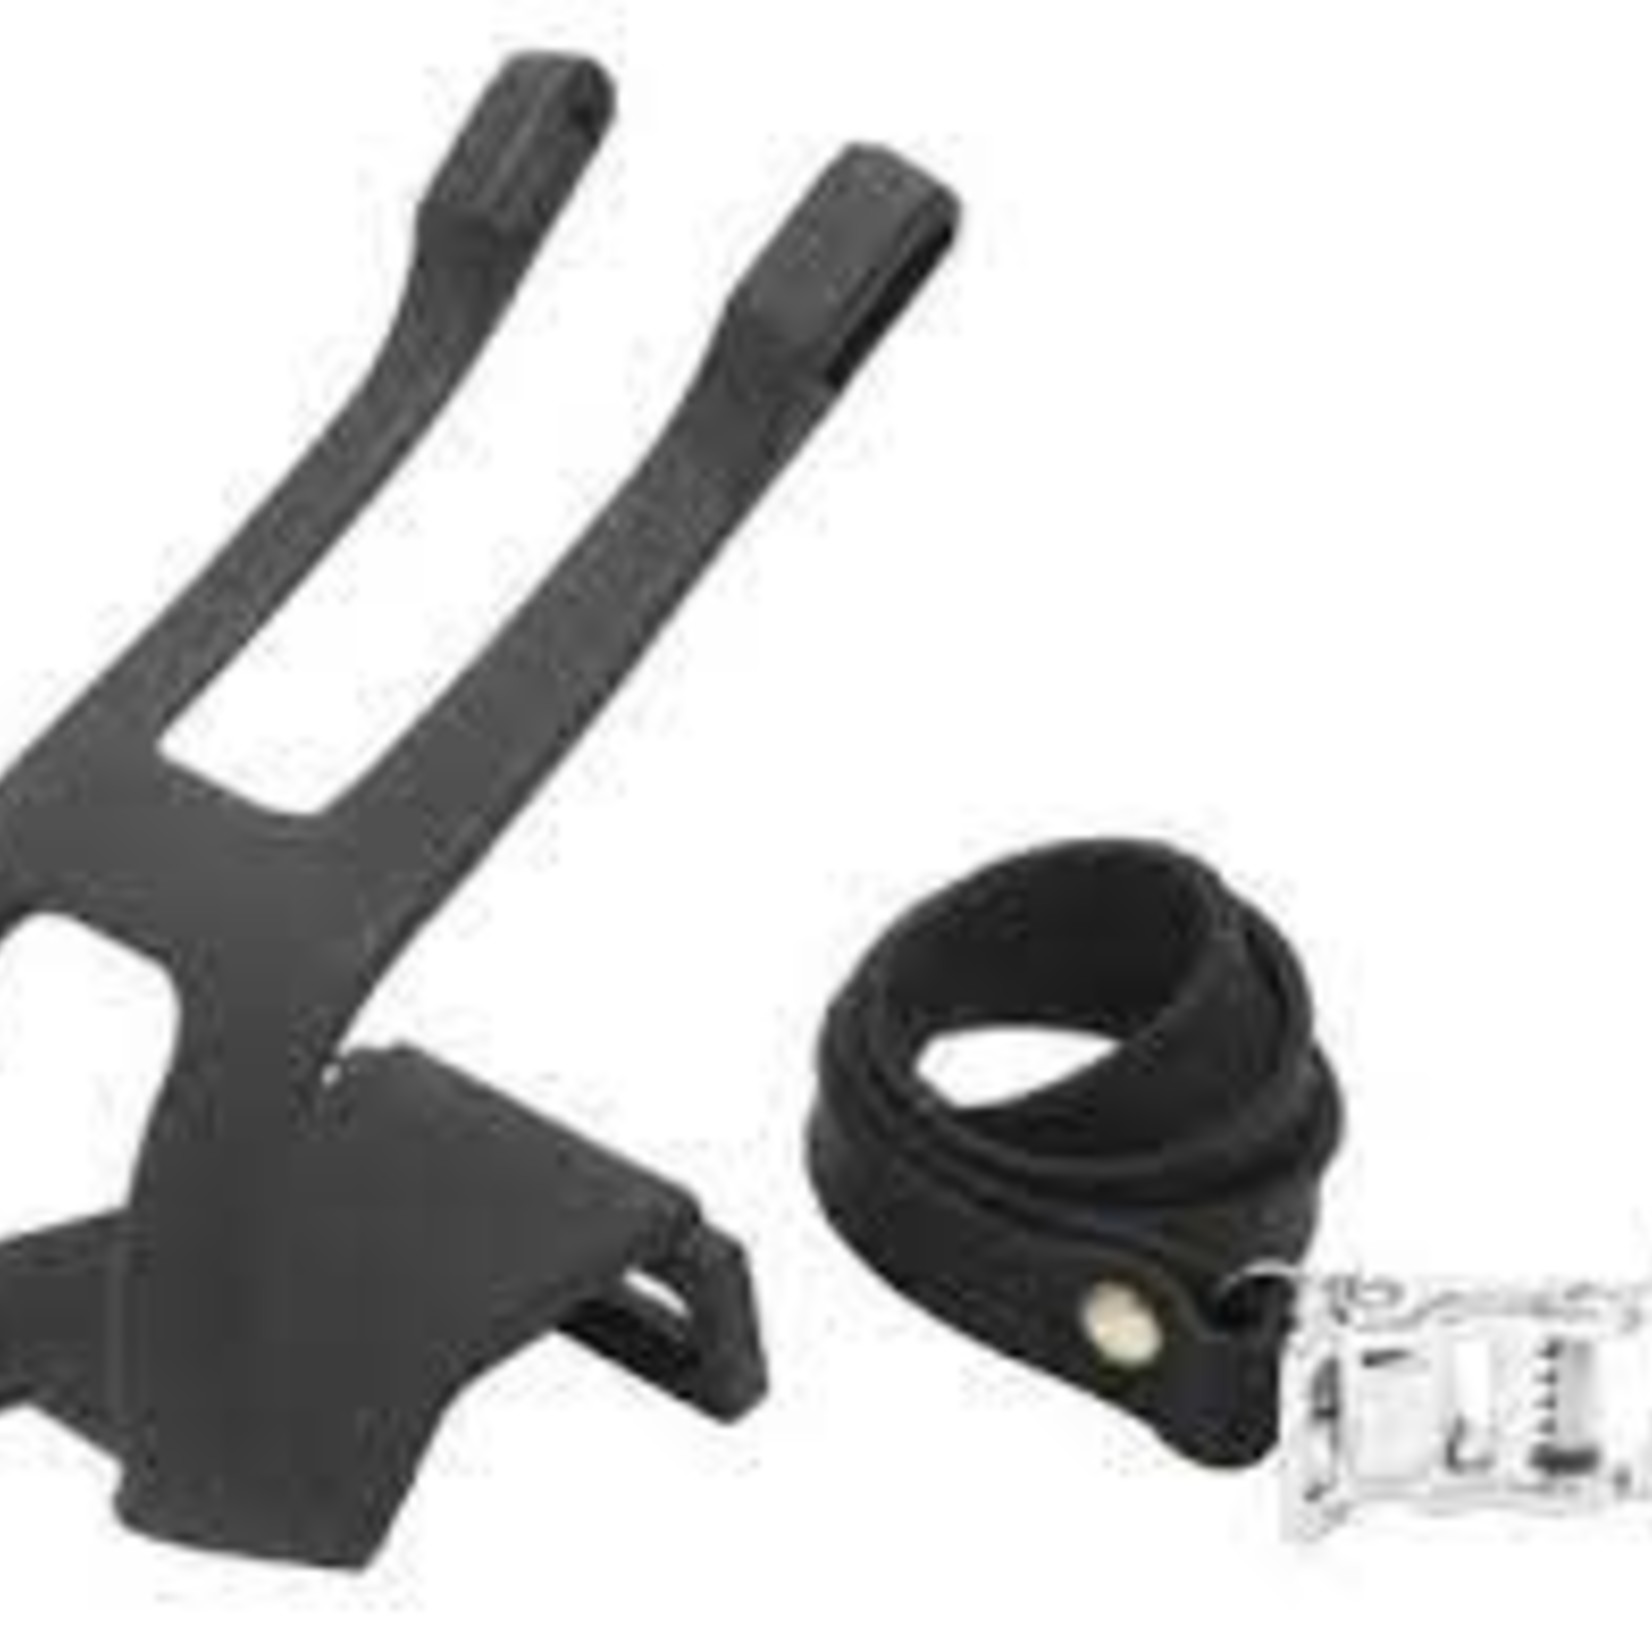 Giant Pedal Giant  AC Toe Clip & Strap Set MD Silver/Black